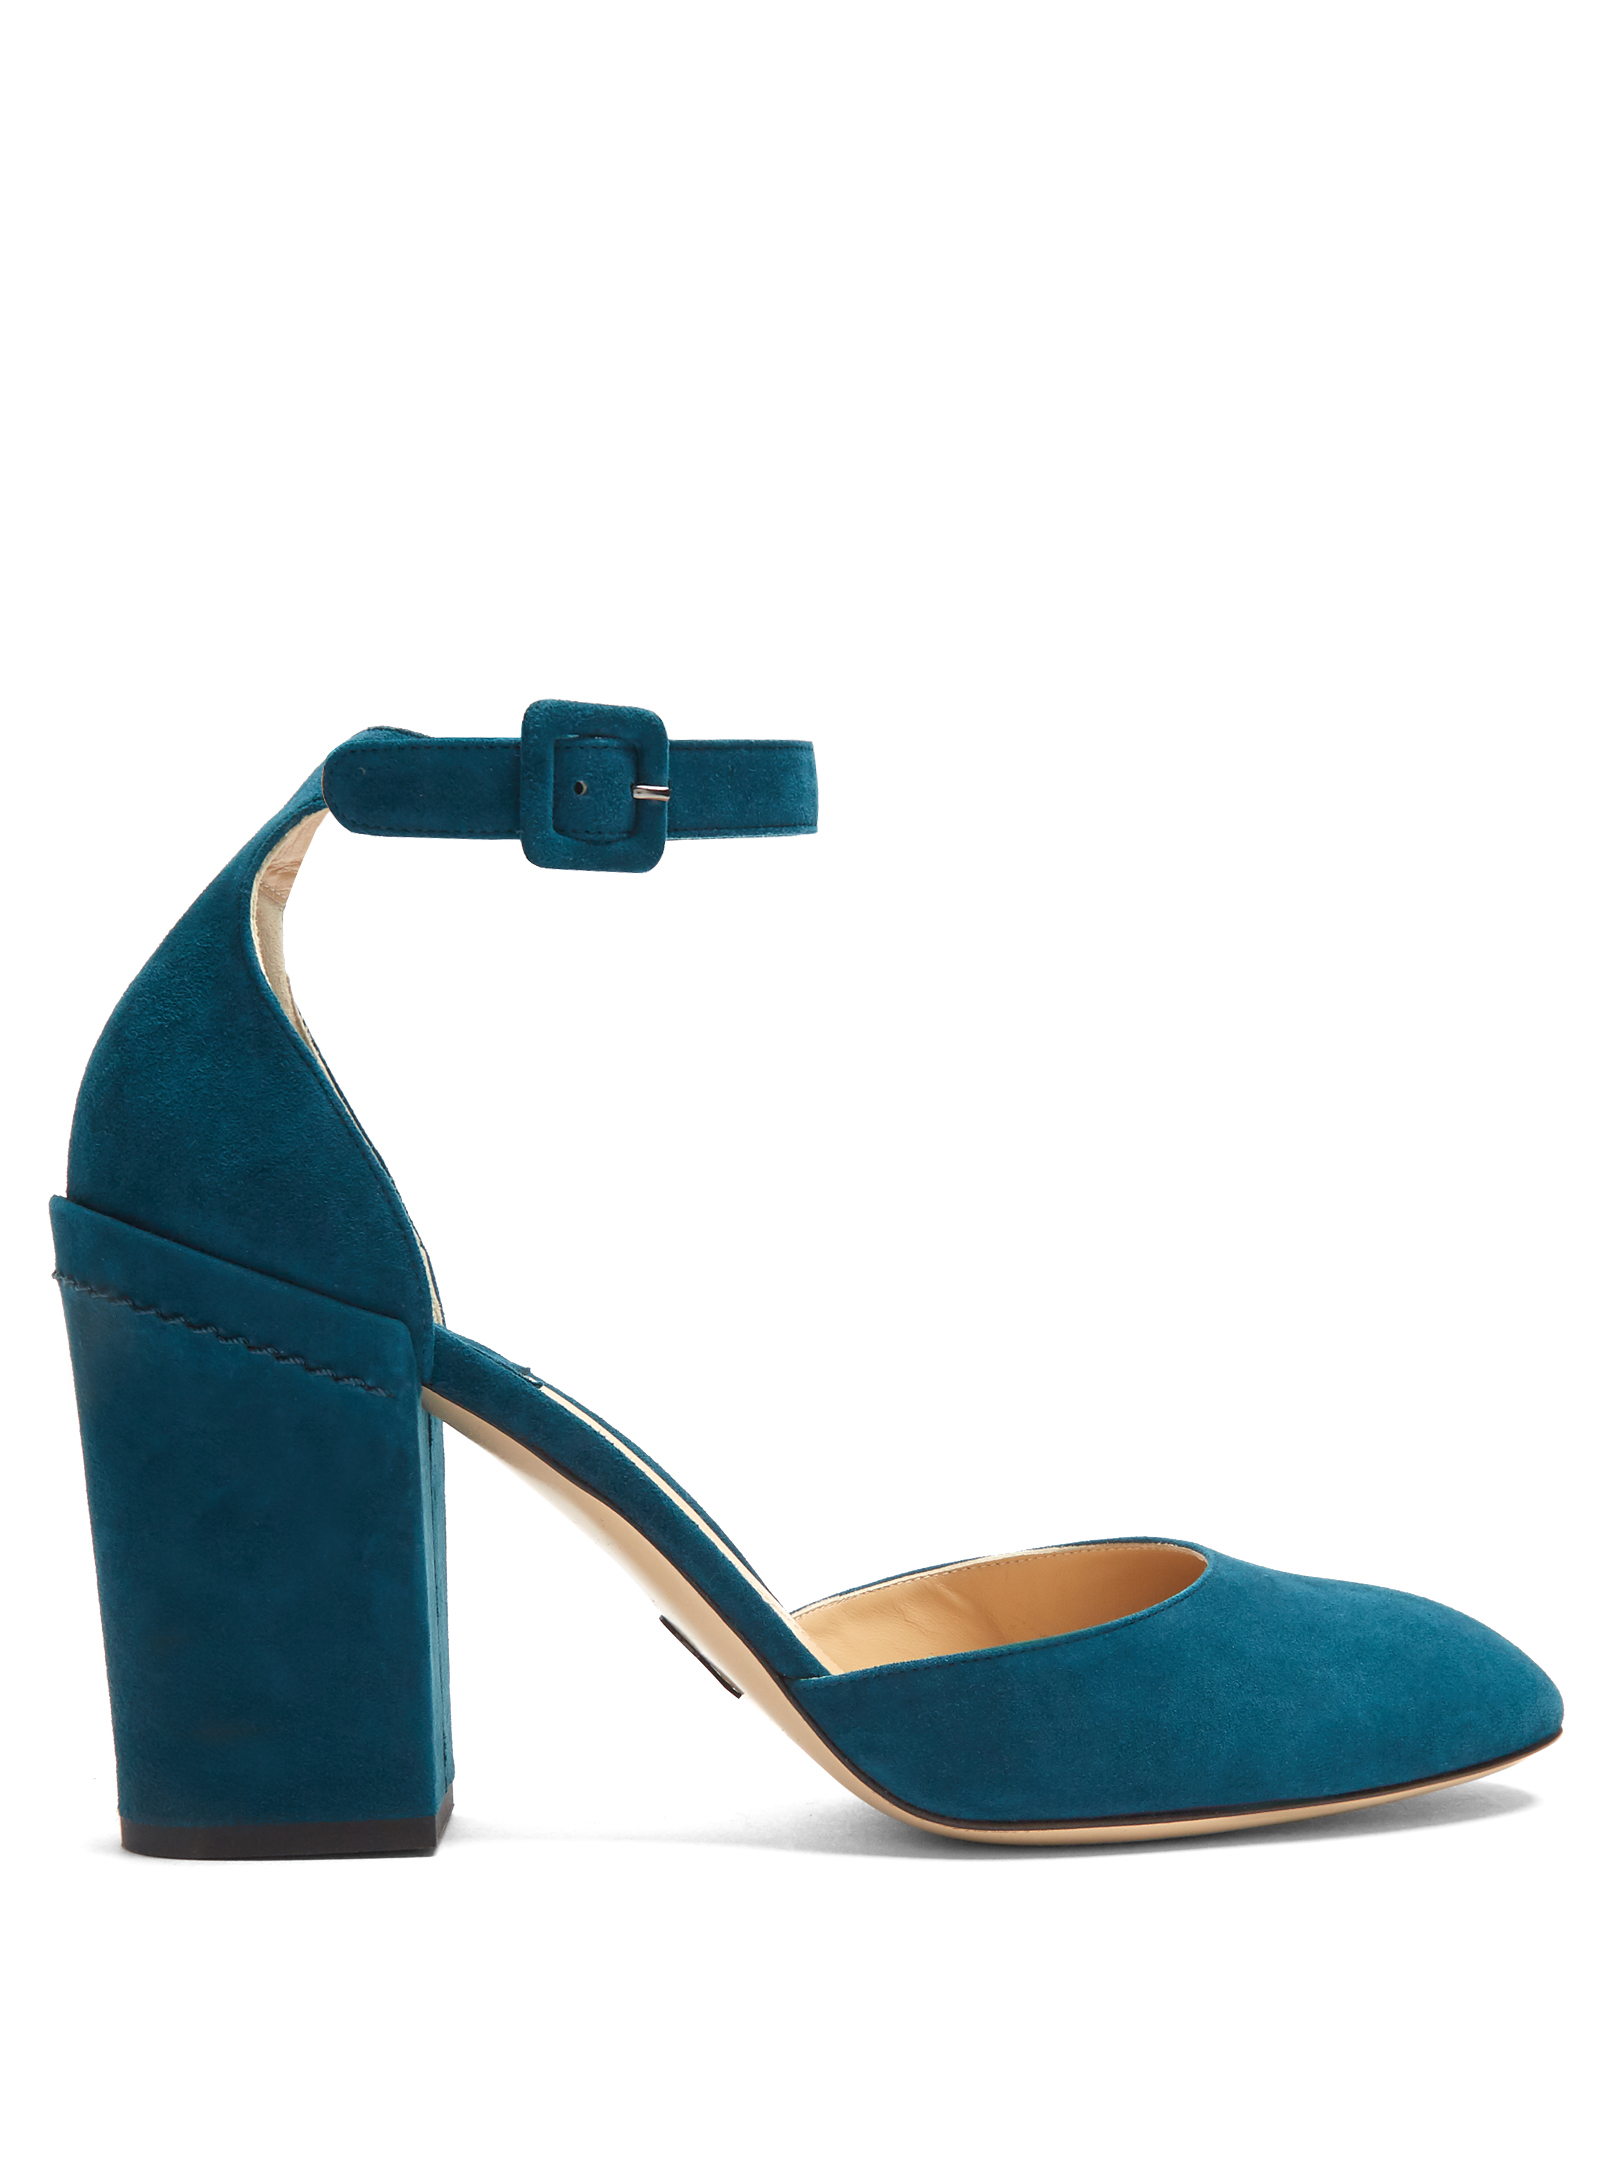 Paul Andrew - Bastioni Block-Heel Suede Pumps | ABOUT ICONS